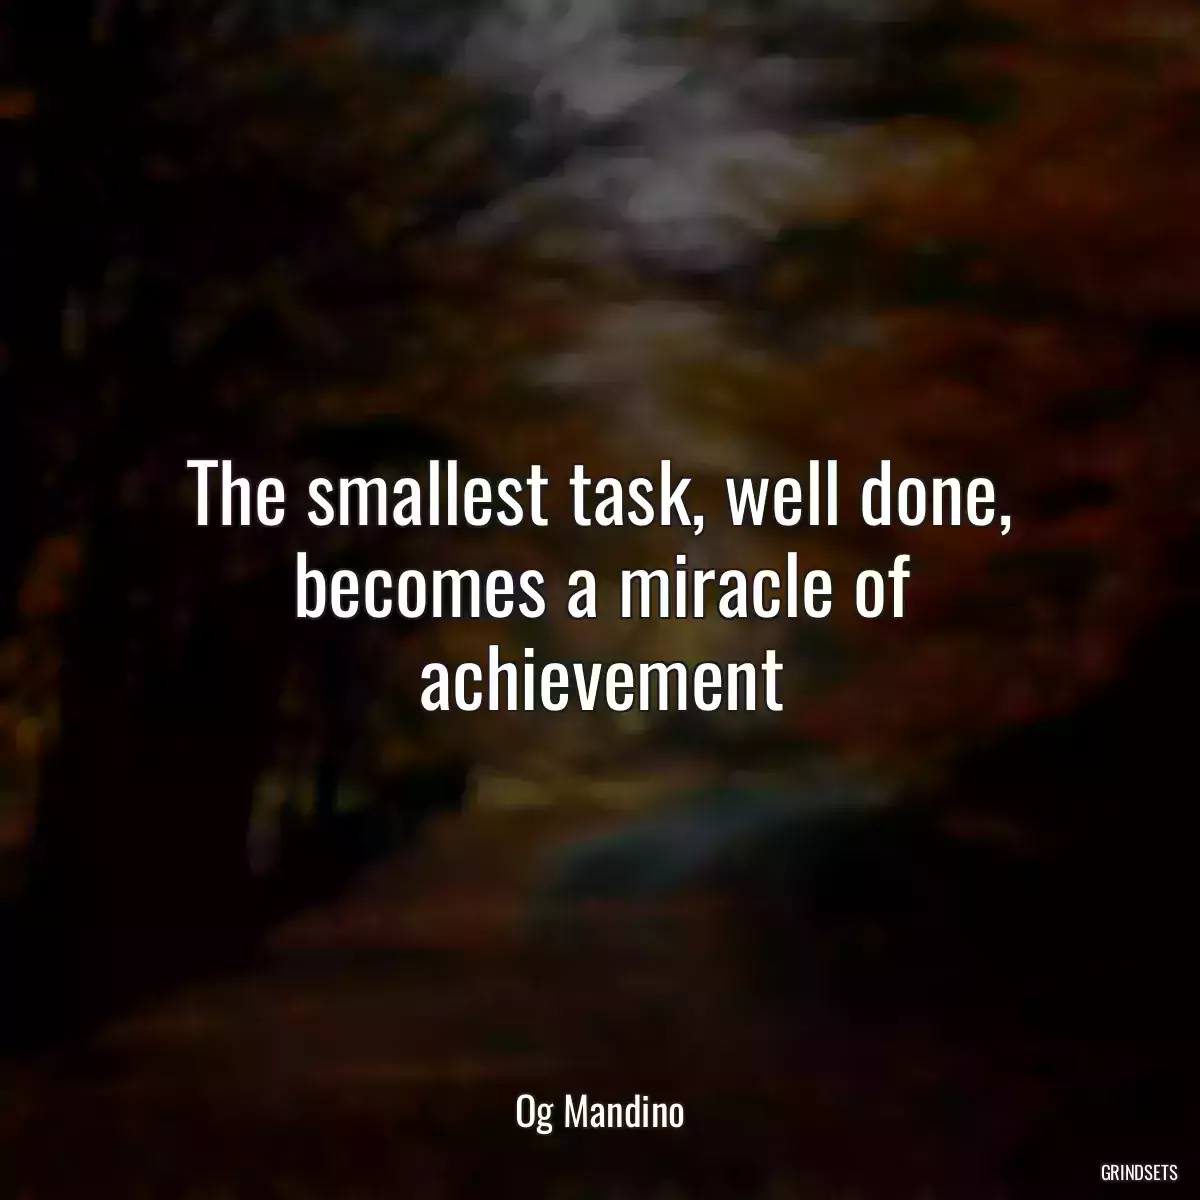 The smallest task, well done, becomes a miracle of achievement